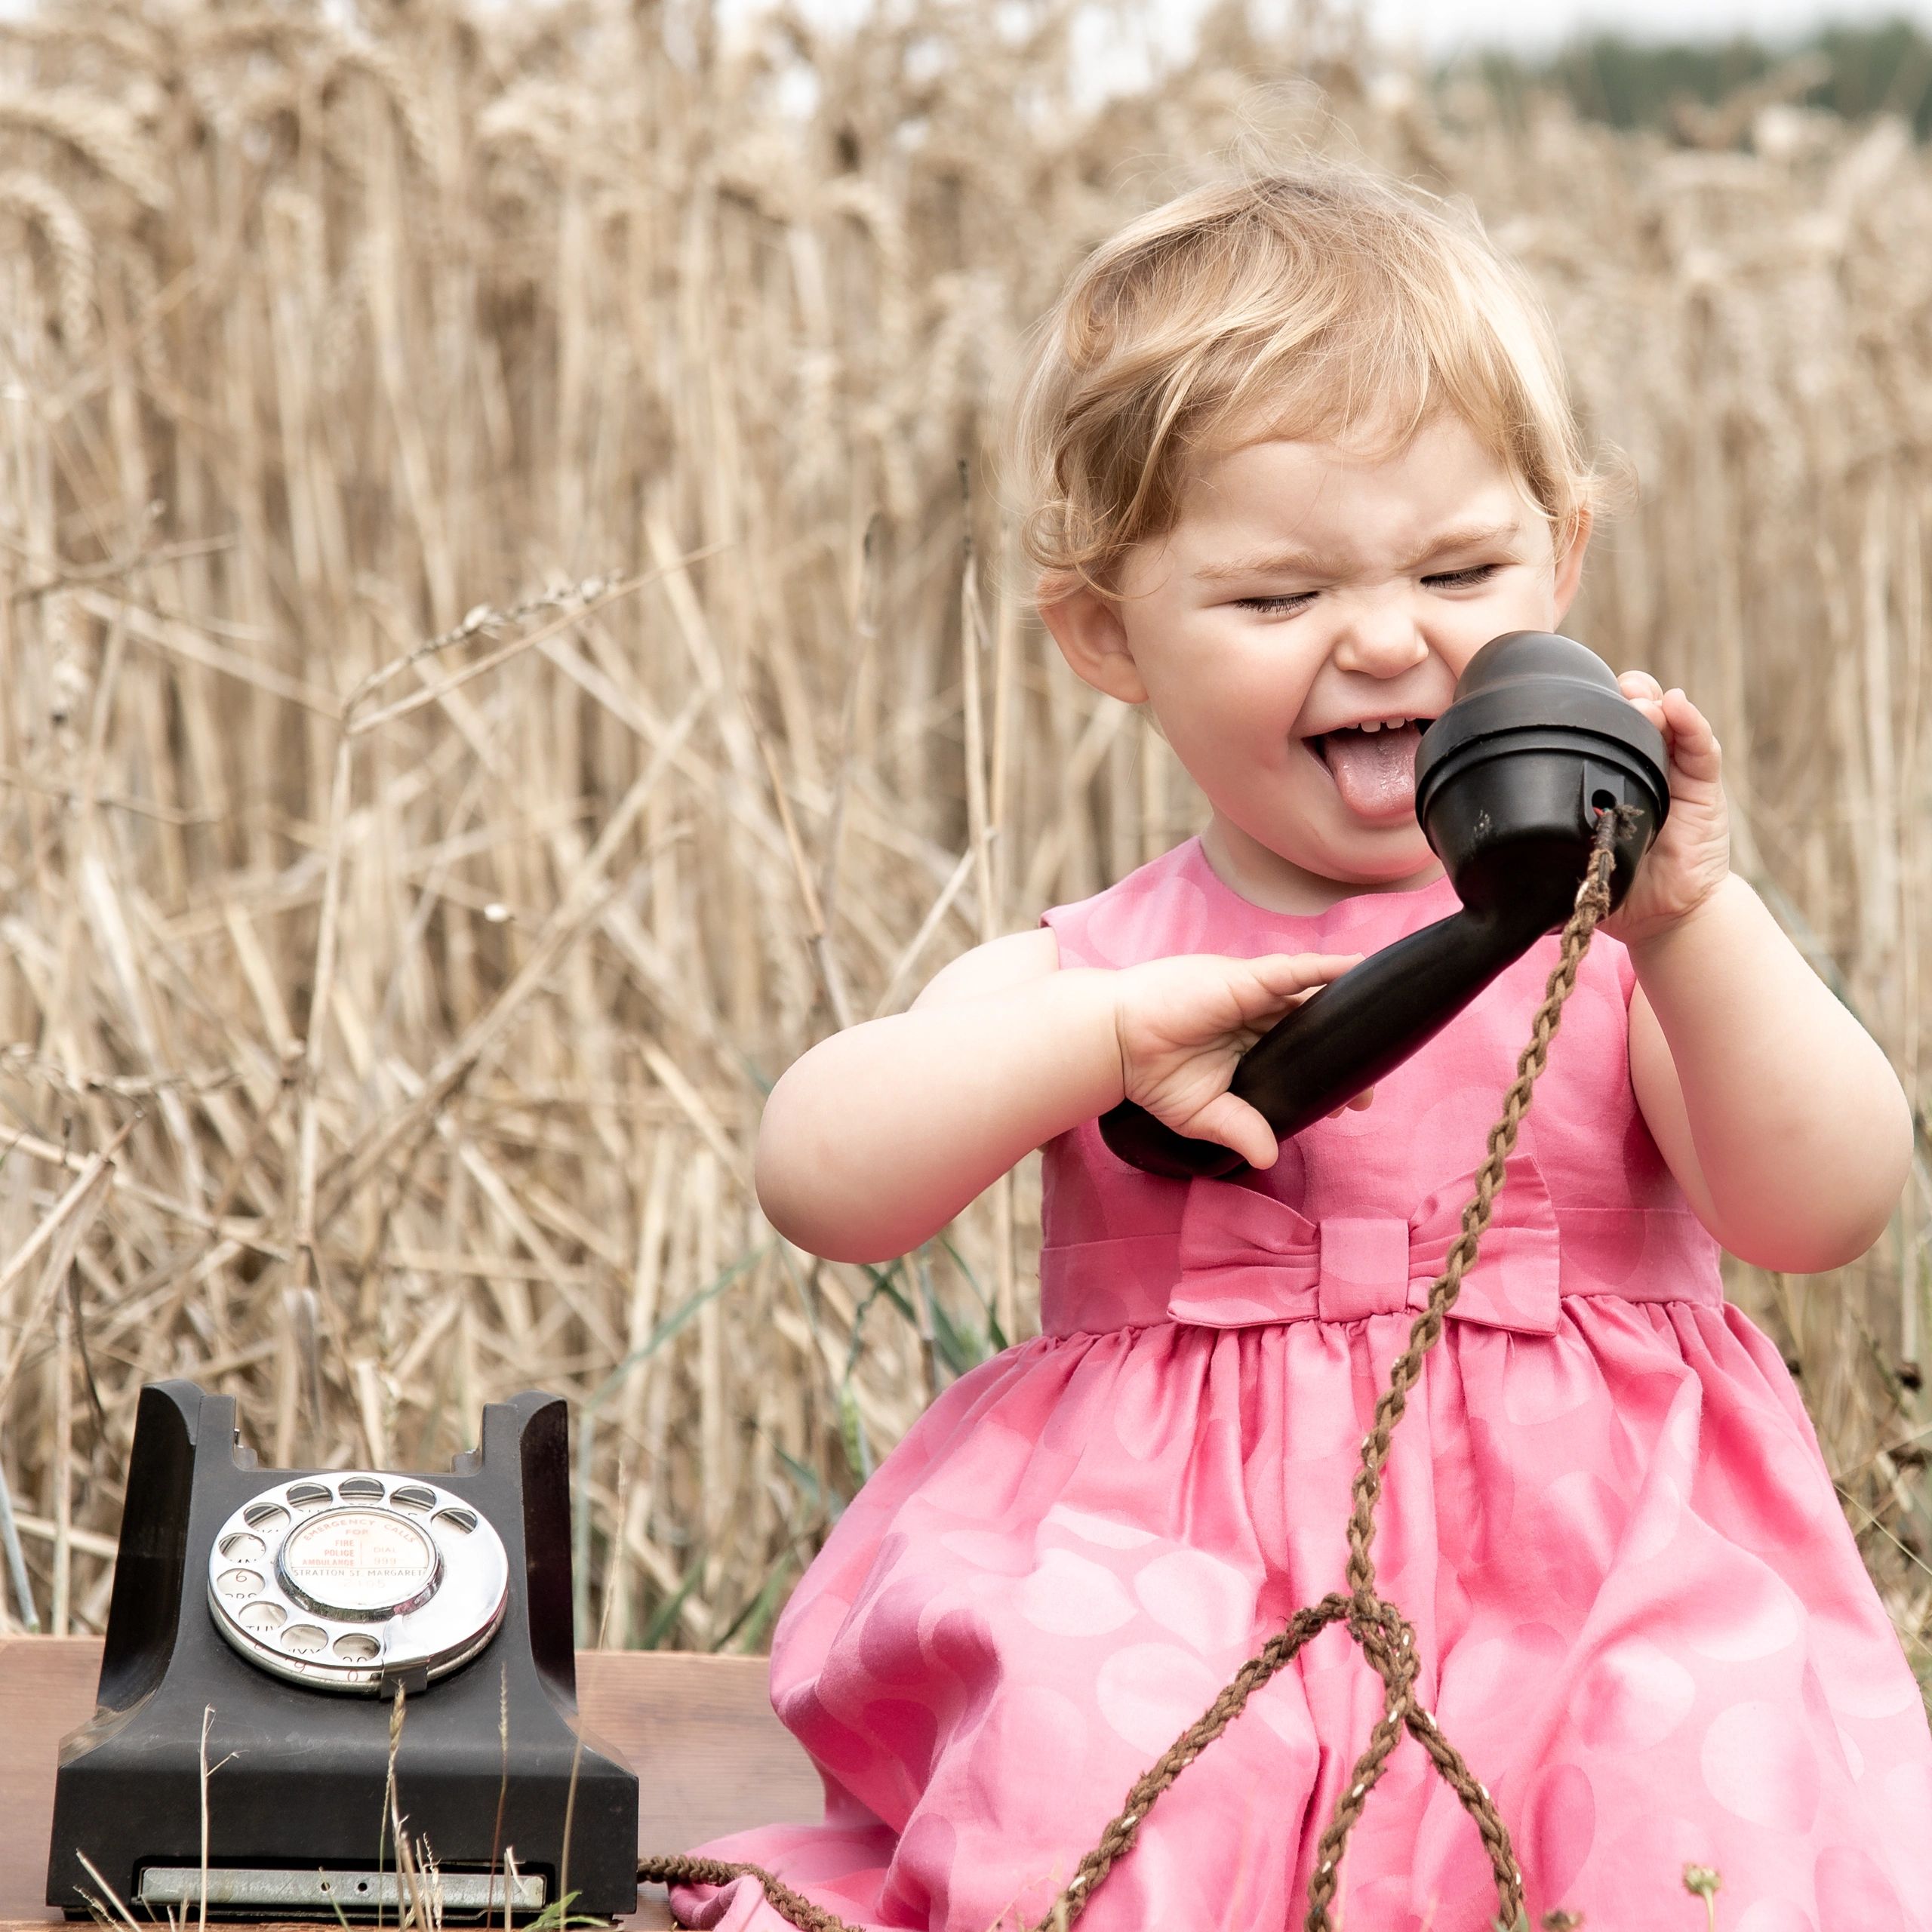 Wedding candid photograph, quirky but fun.  Photograph of a toddler sat in a wheat field on a suitca